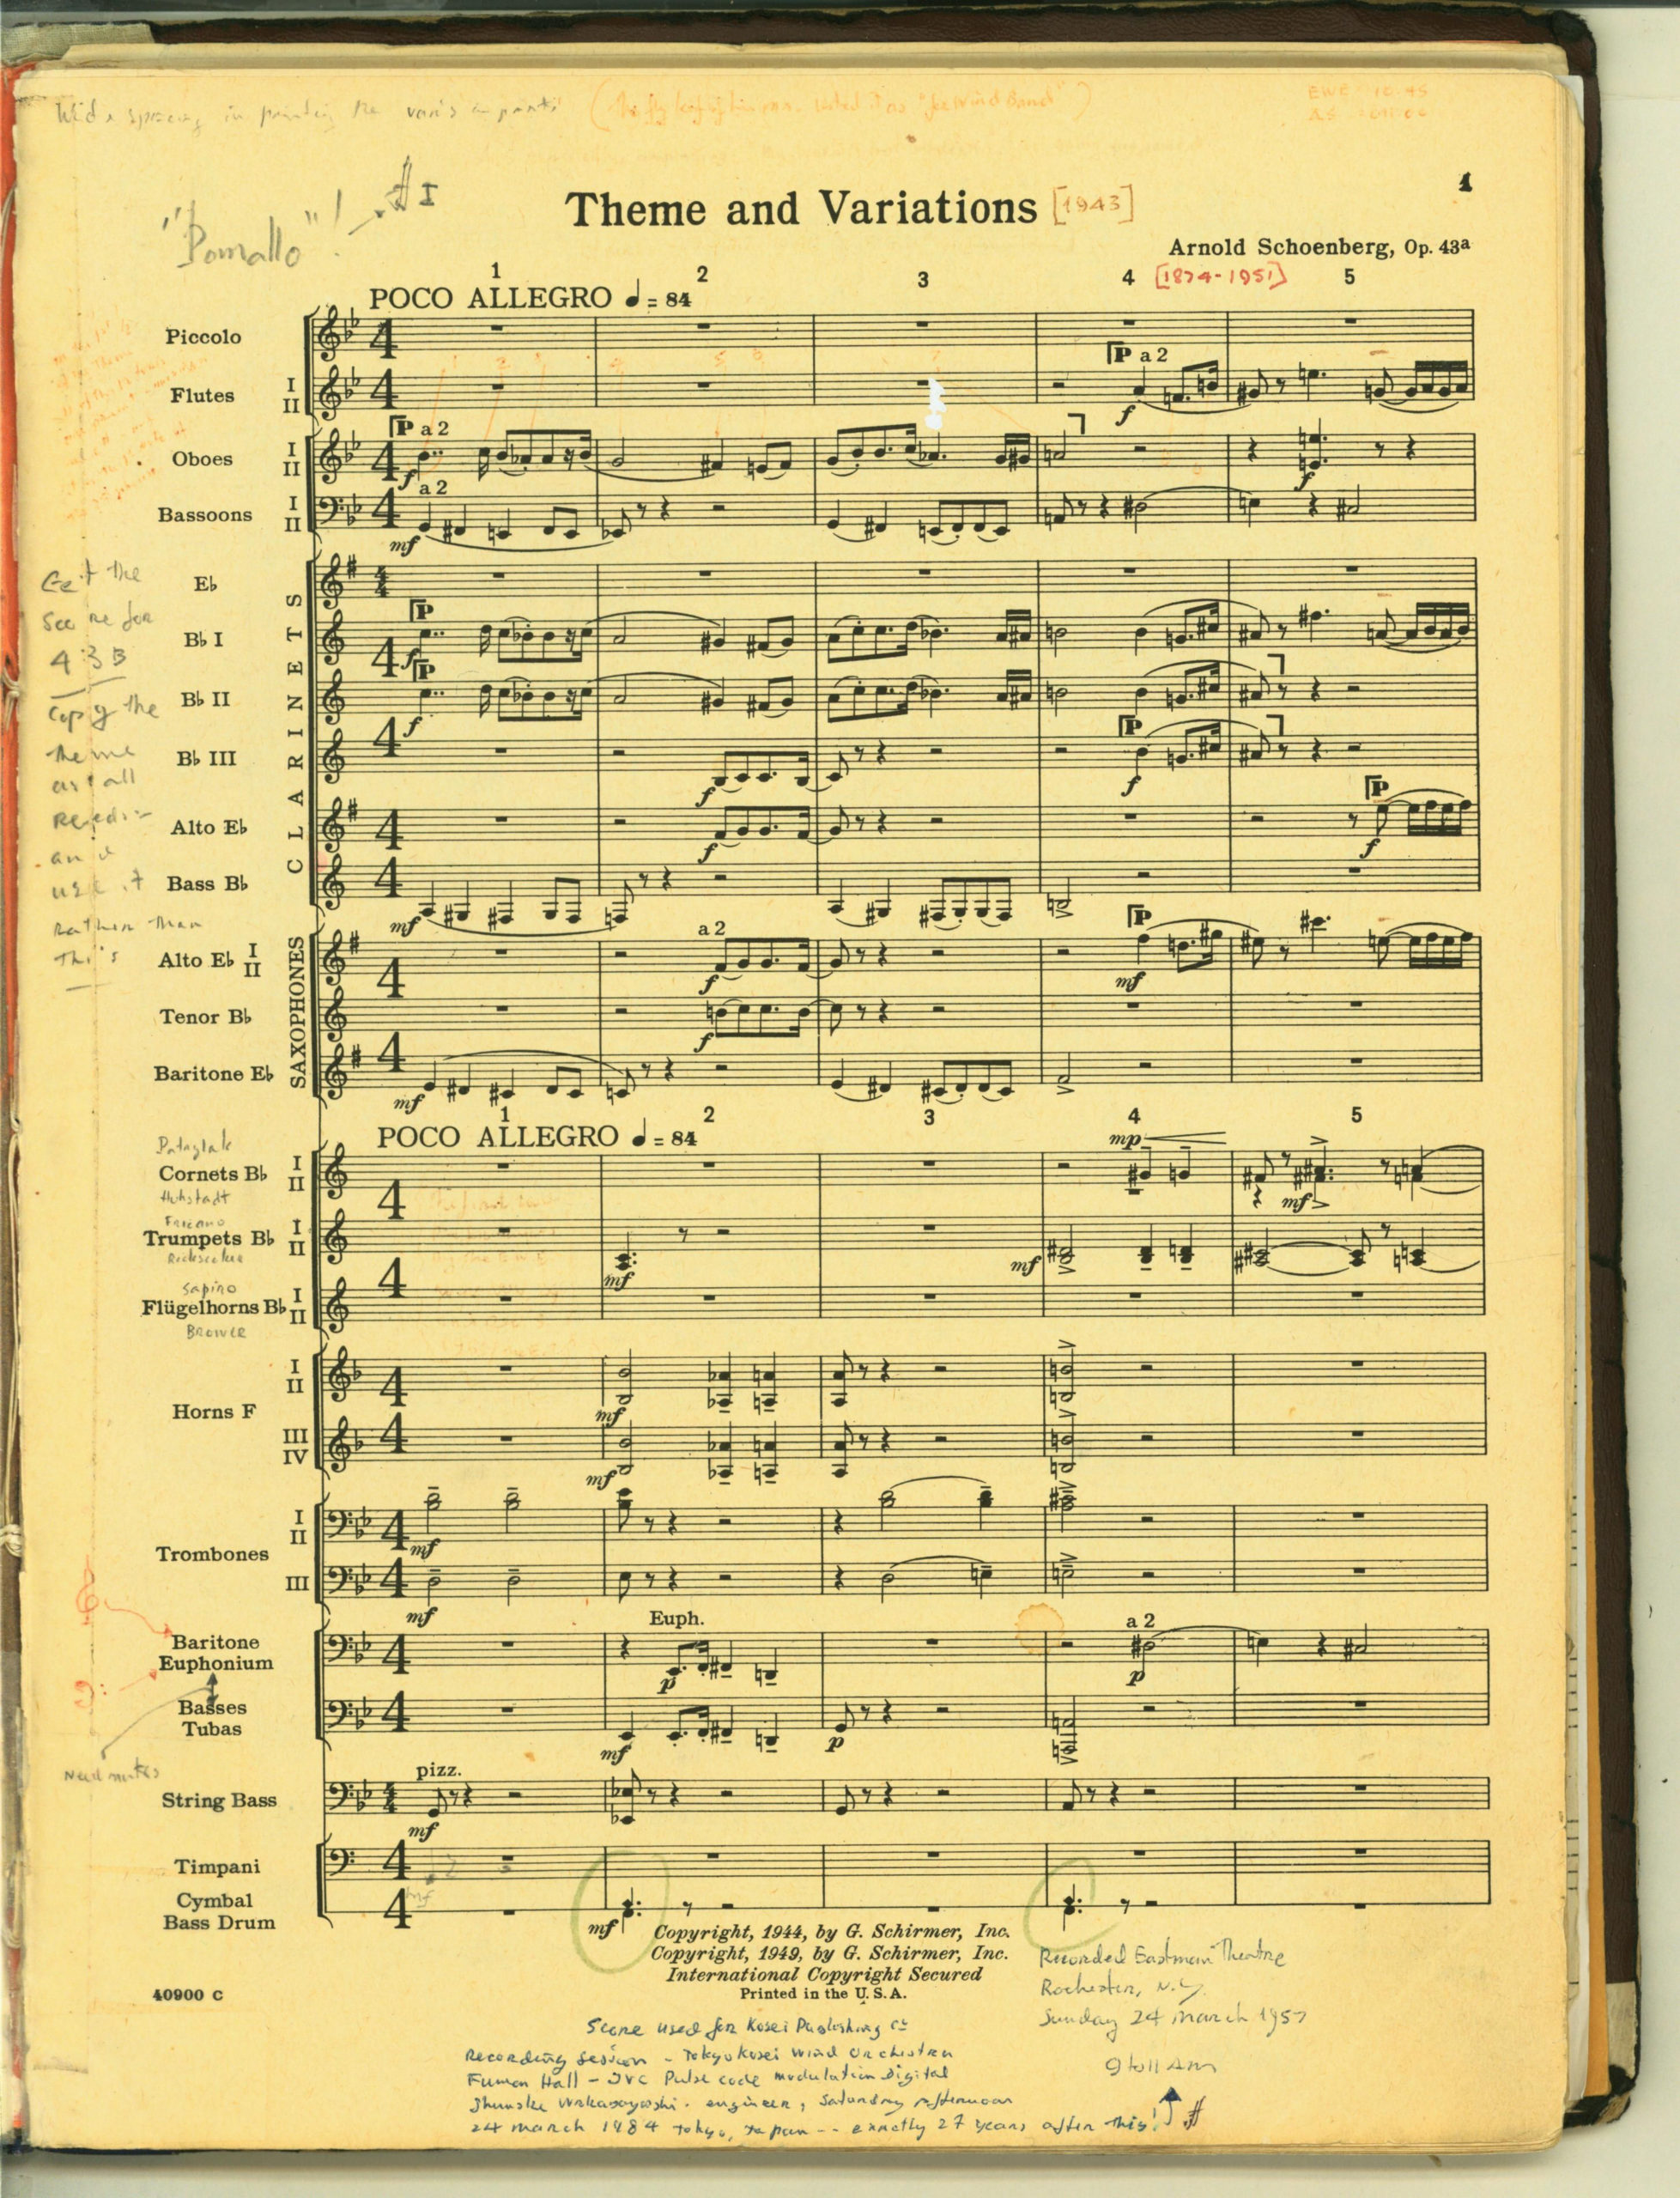 FF1085 first page of music